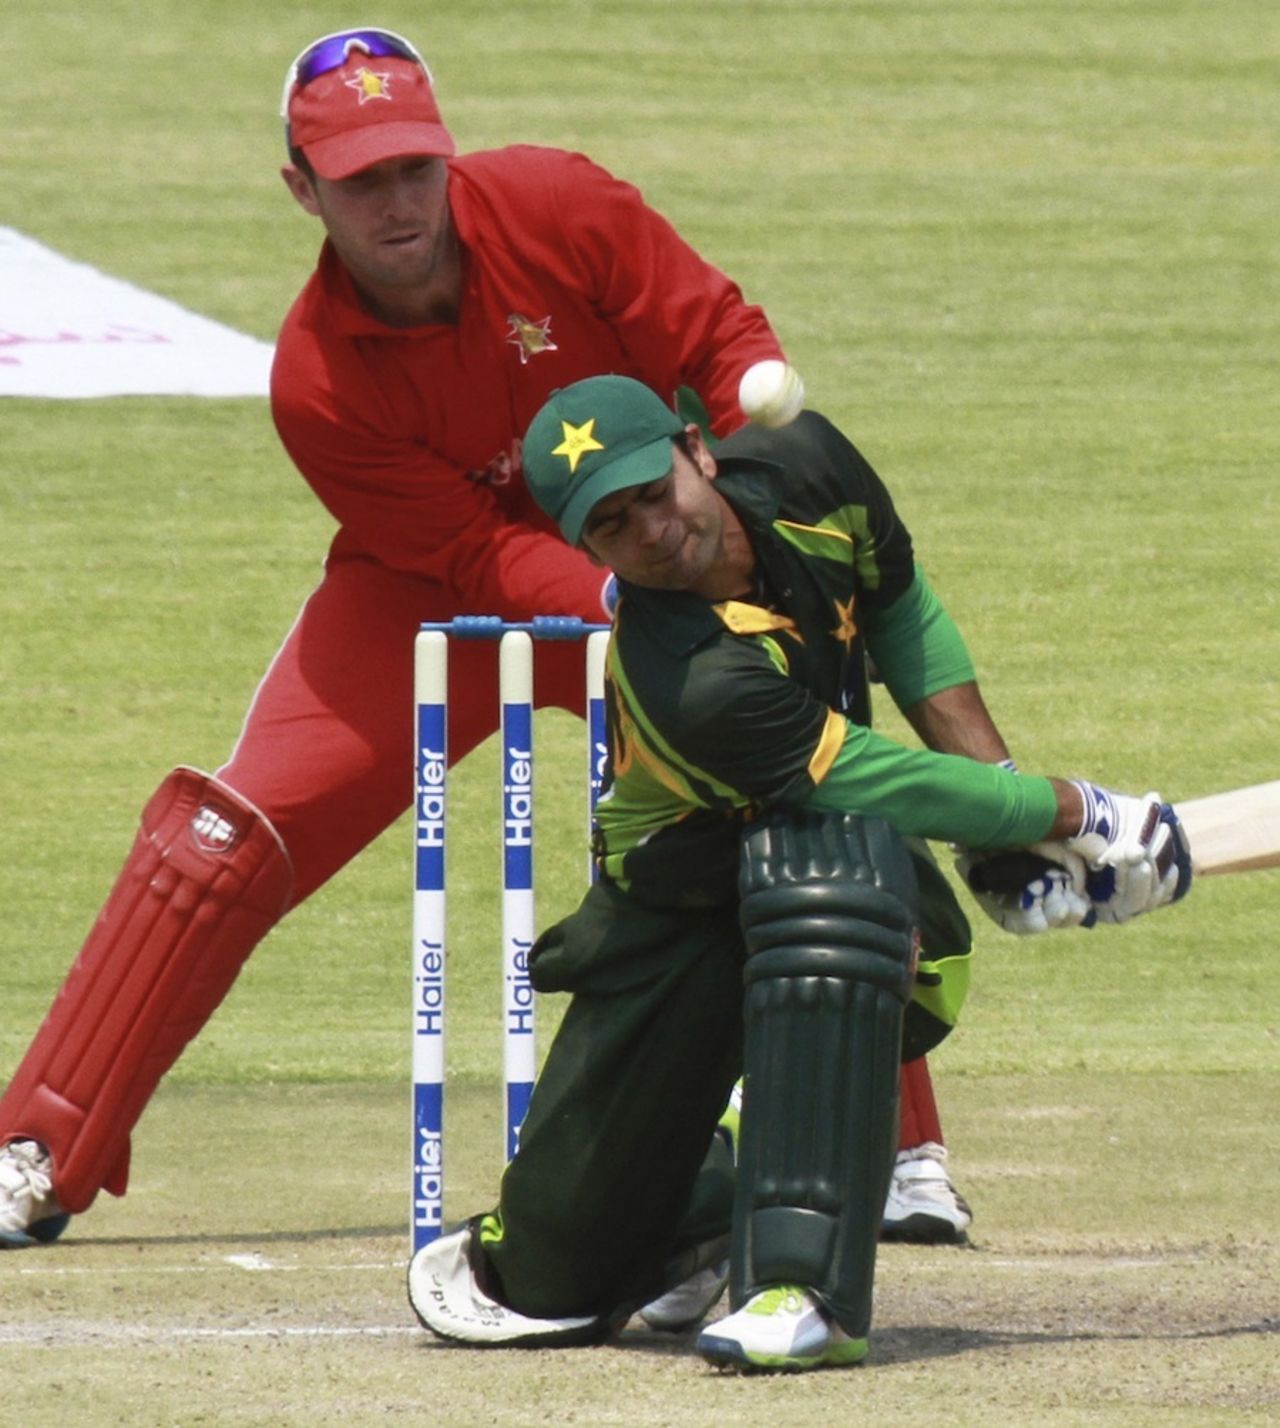 Ahmed Shehzad fails to connect bat with ball, Zimbabwe v Pakistan, 3rd ODI, Harare, August 31, 2013